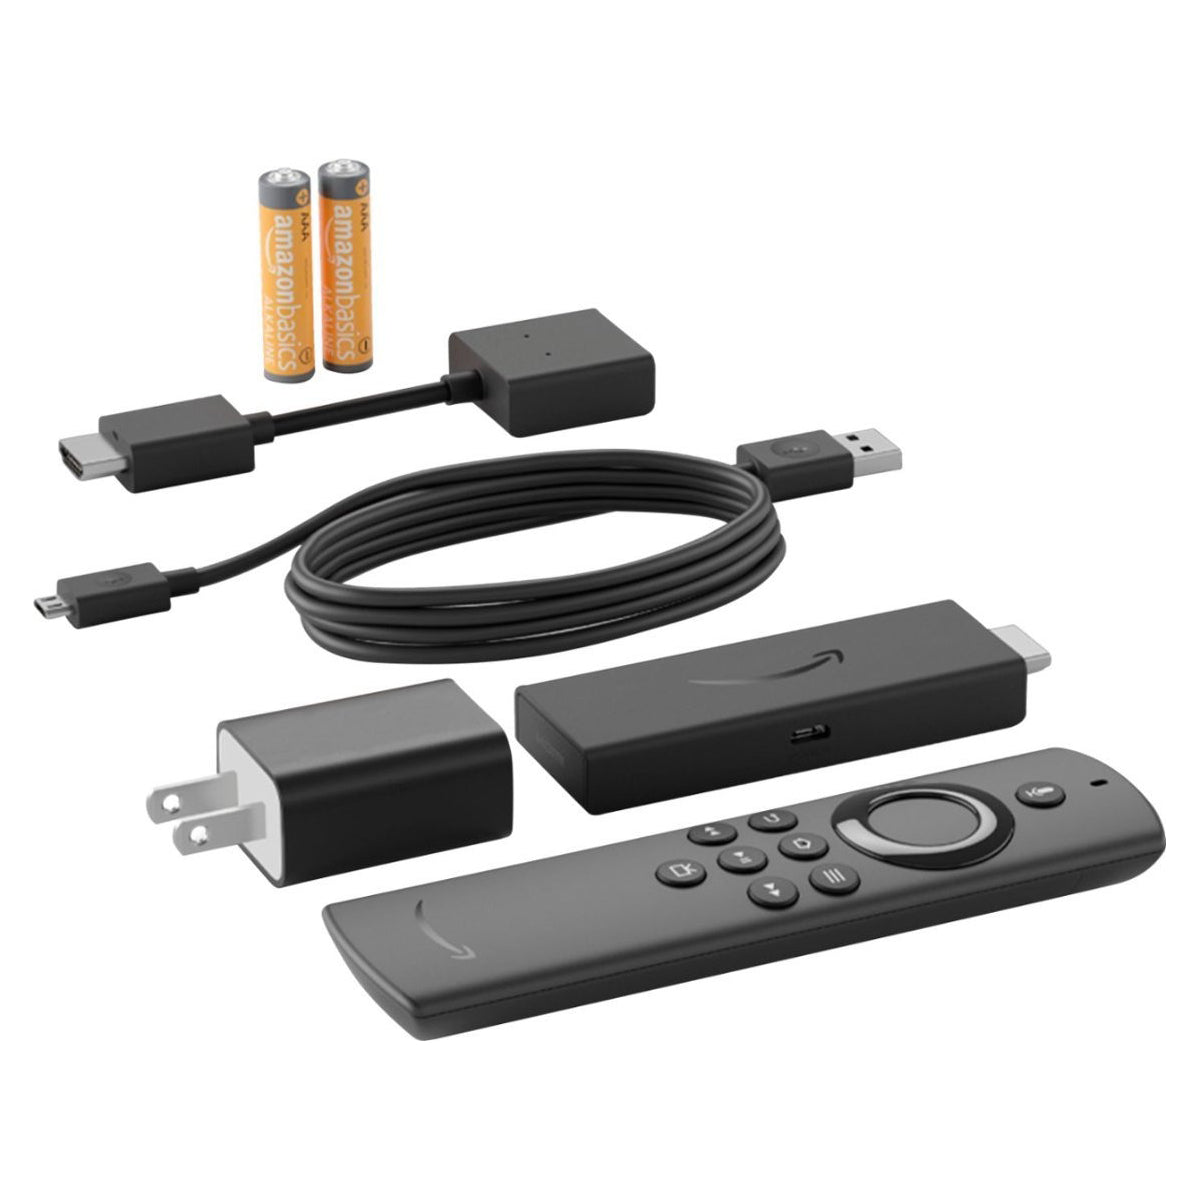 Fire TV Stick Lite: How to Search / Download / Install Apps 